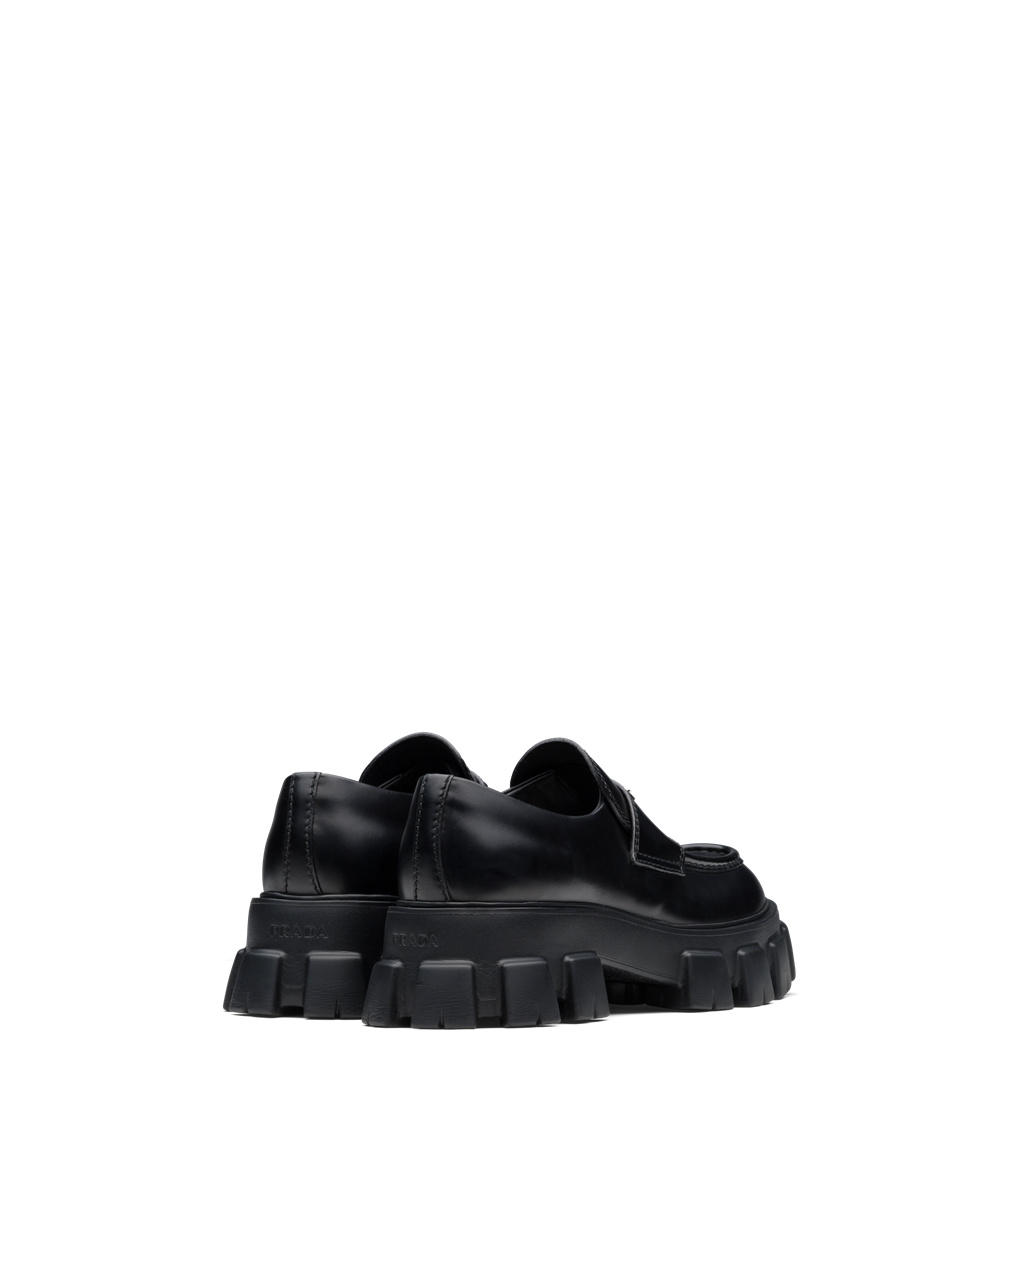 Prada Monolith Brushed Leather Loafers Black | 6248VIEDG